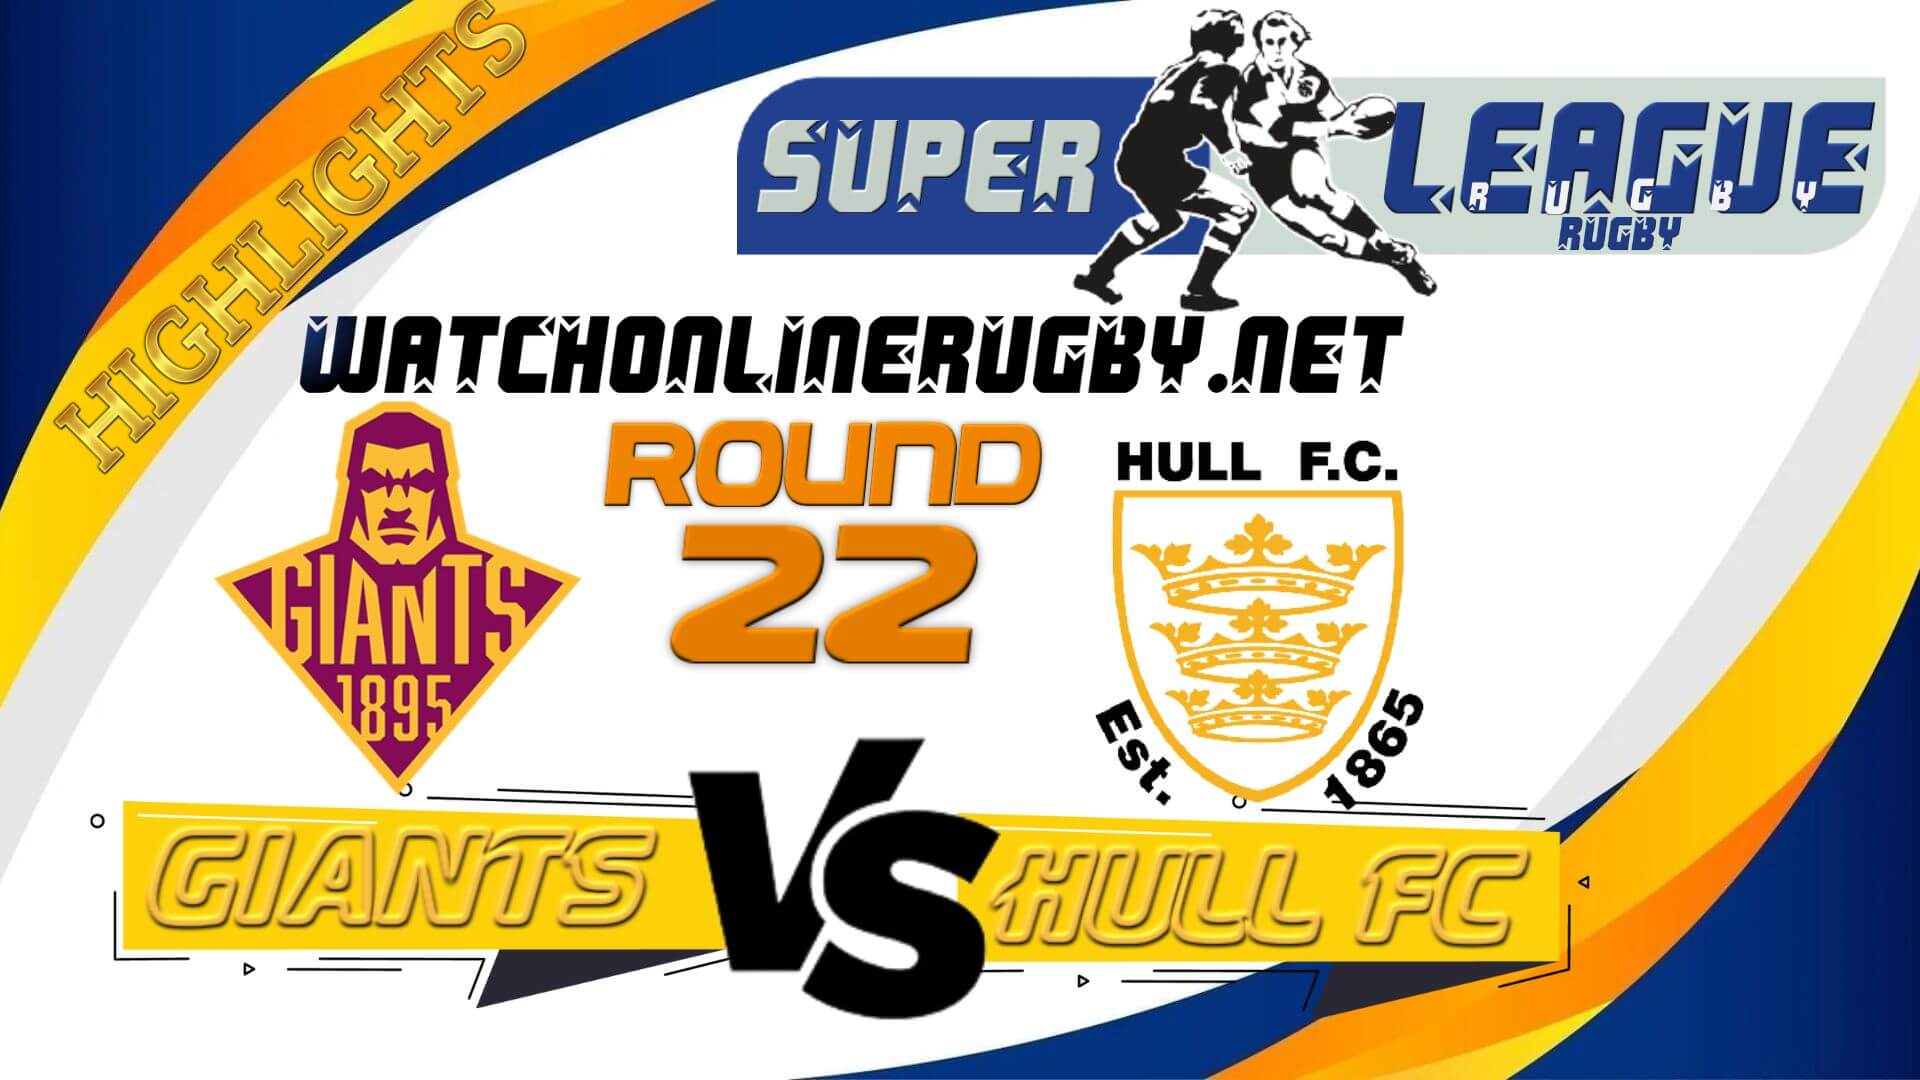 Huddersfield Giants Vs Hull FC Super League Rugby 2022 RD 22